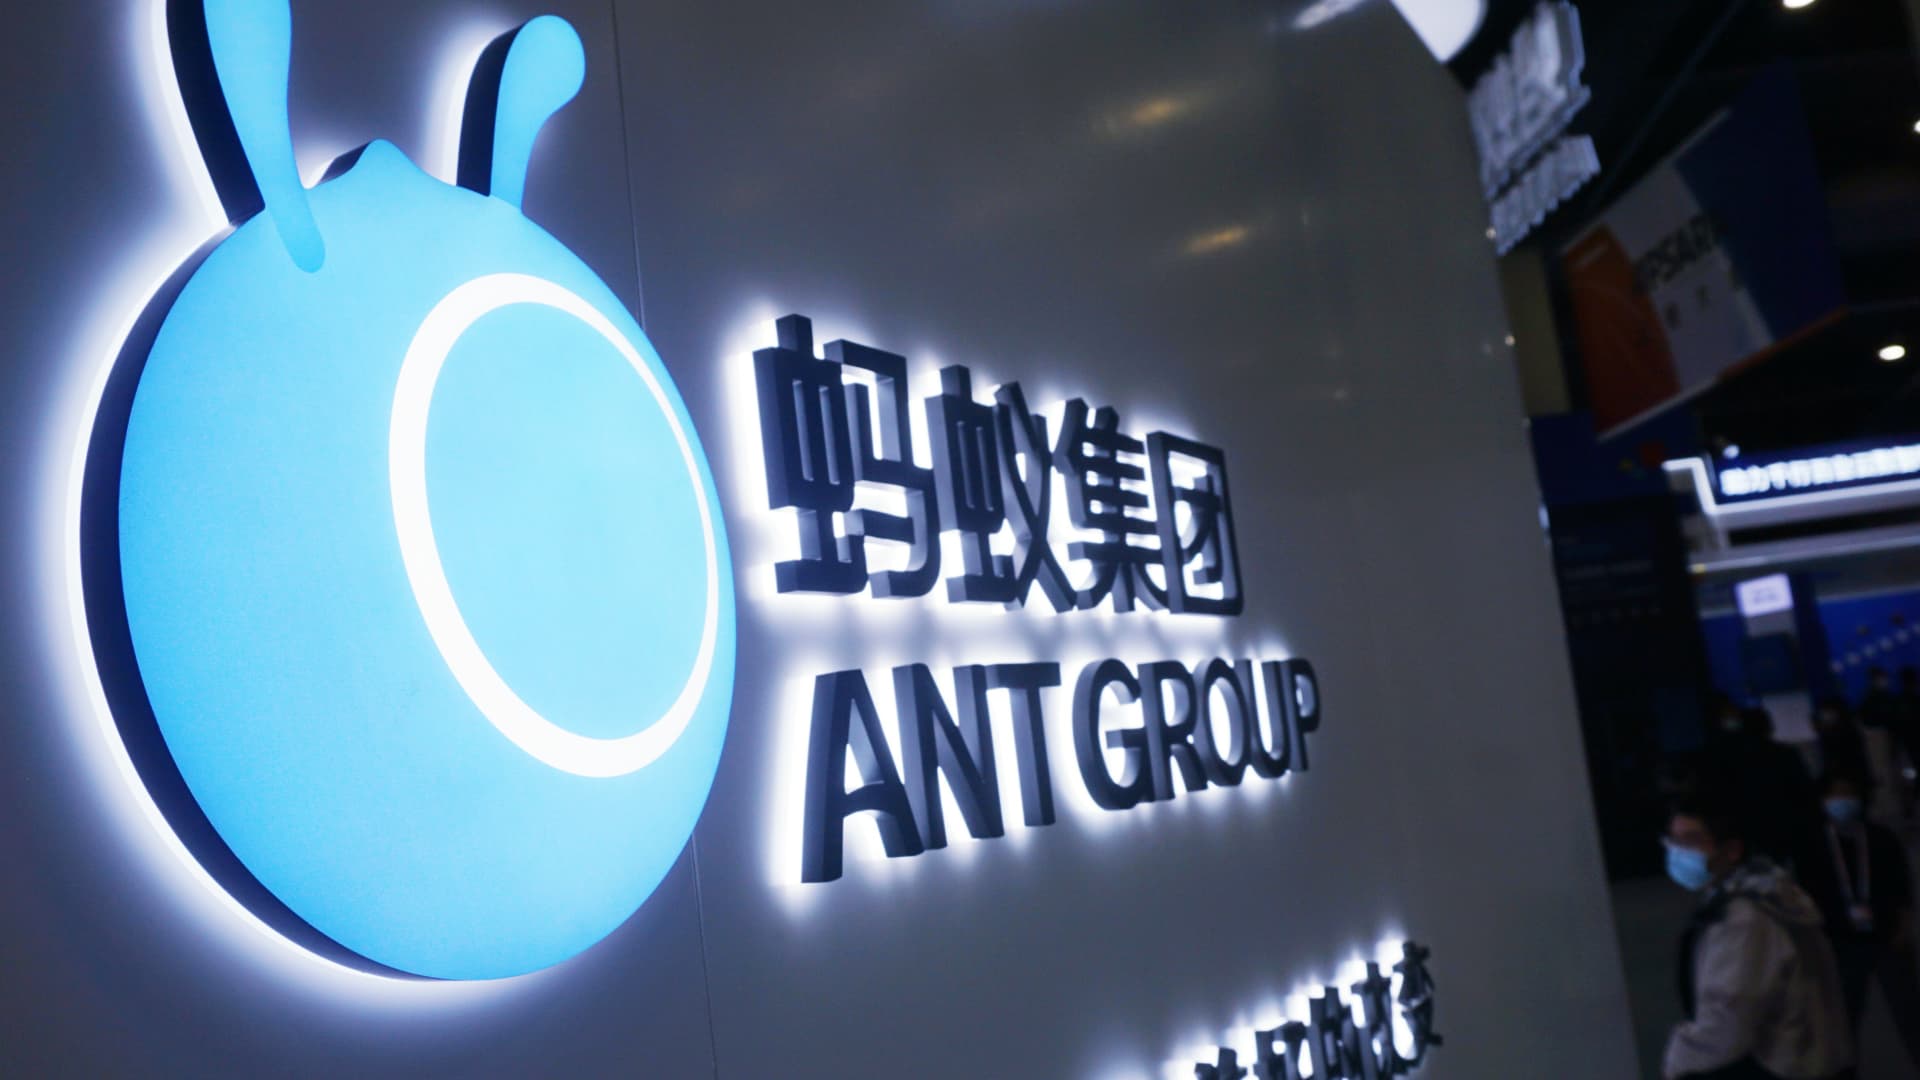 Ant gets approval to expand its consumer finance business